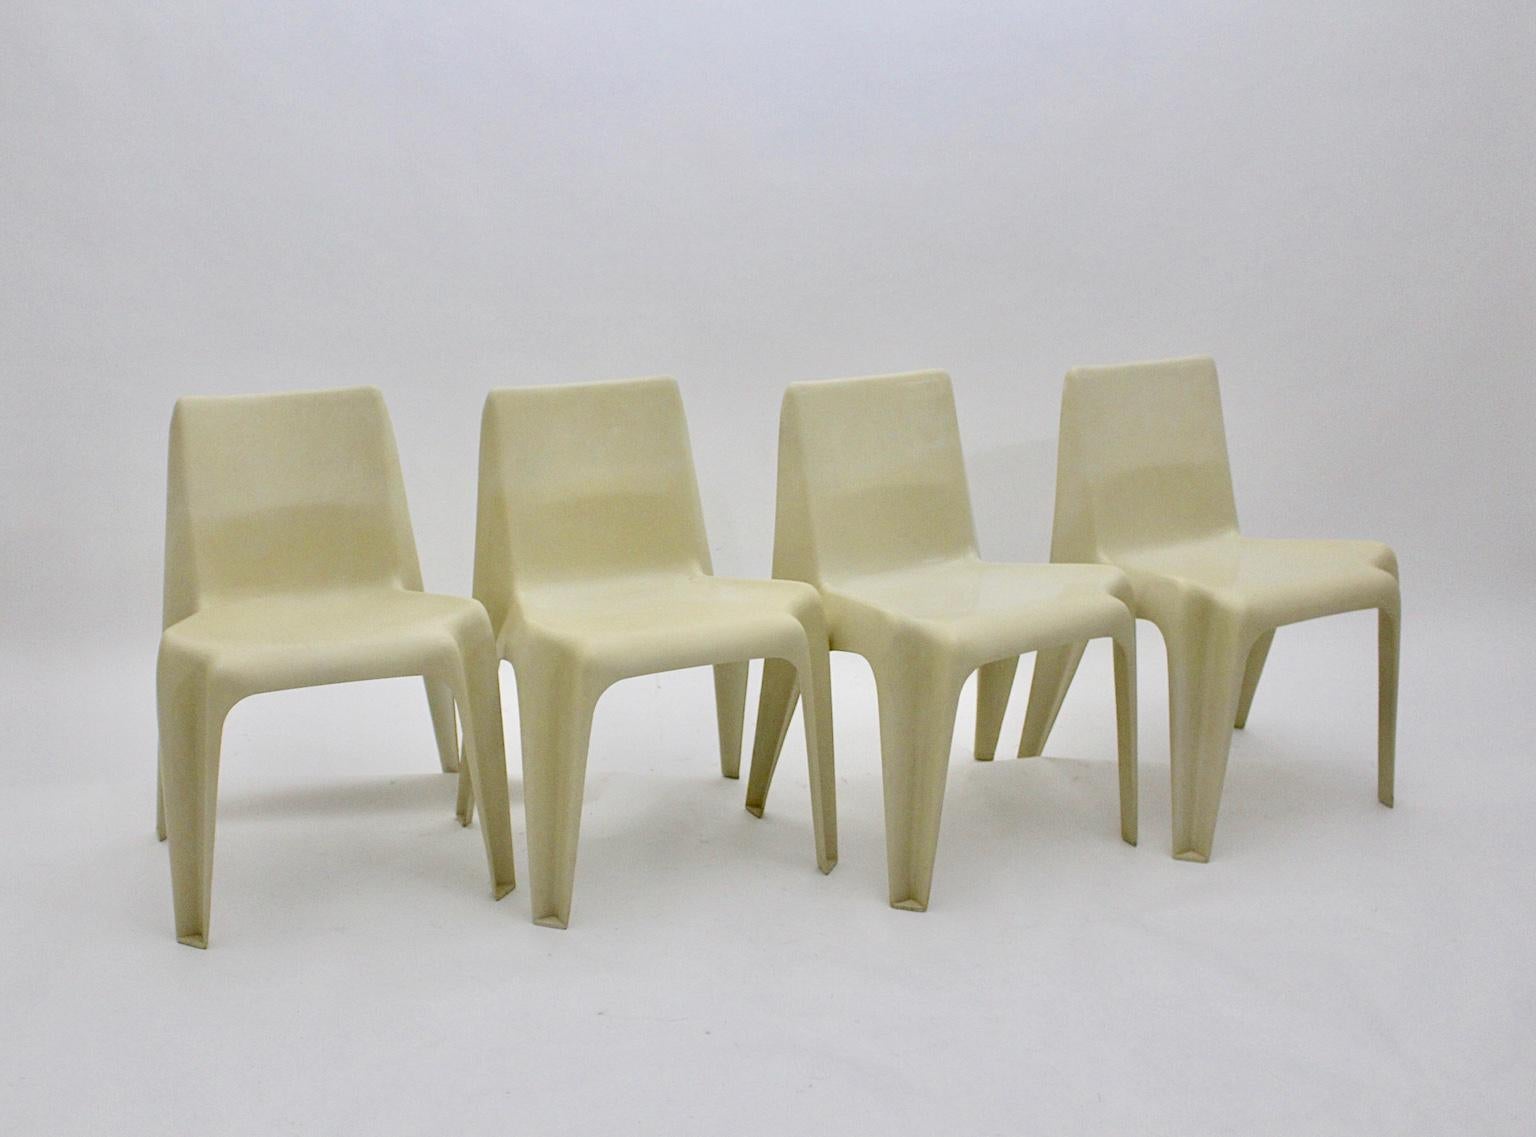 Space Age Vintage Ivory Plastic Four Dining Chairs Helmuth Bätzner 1960s Germany For Sale 1